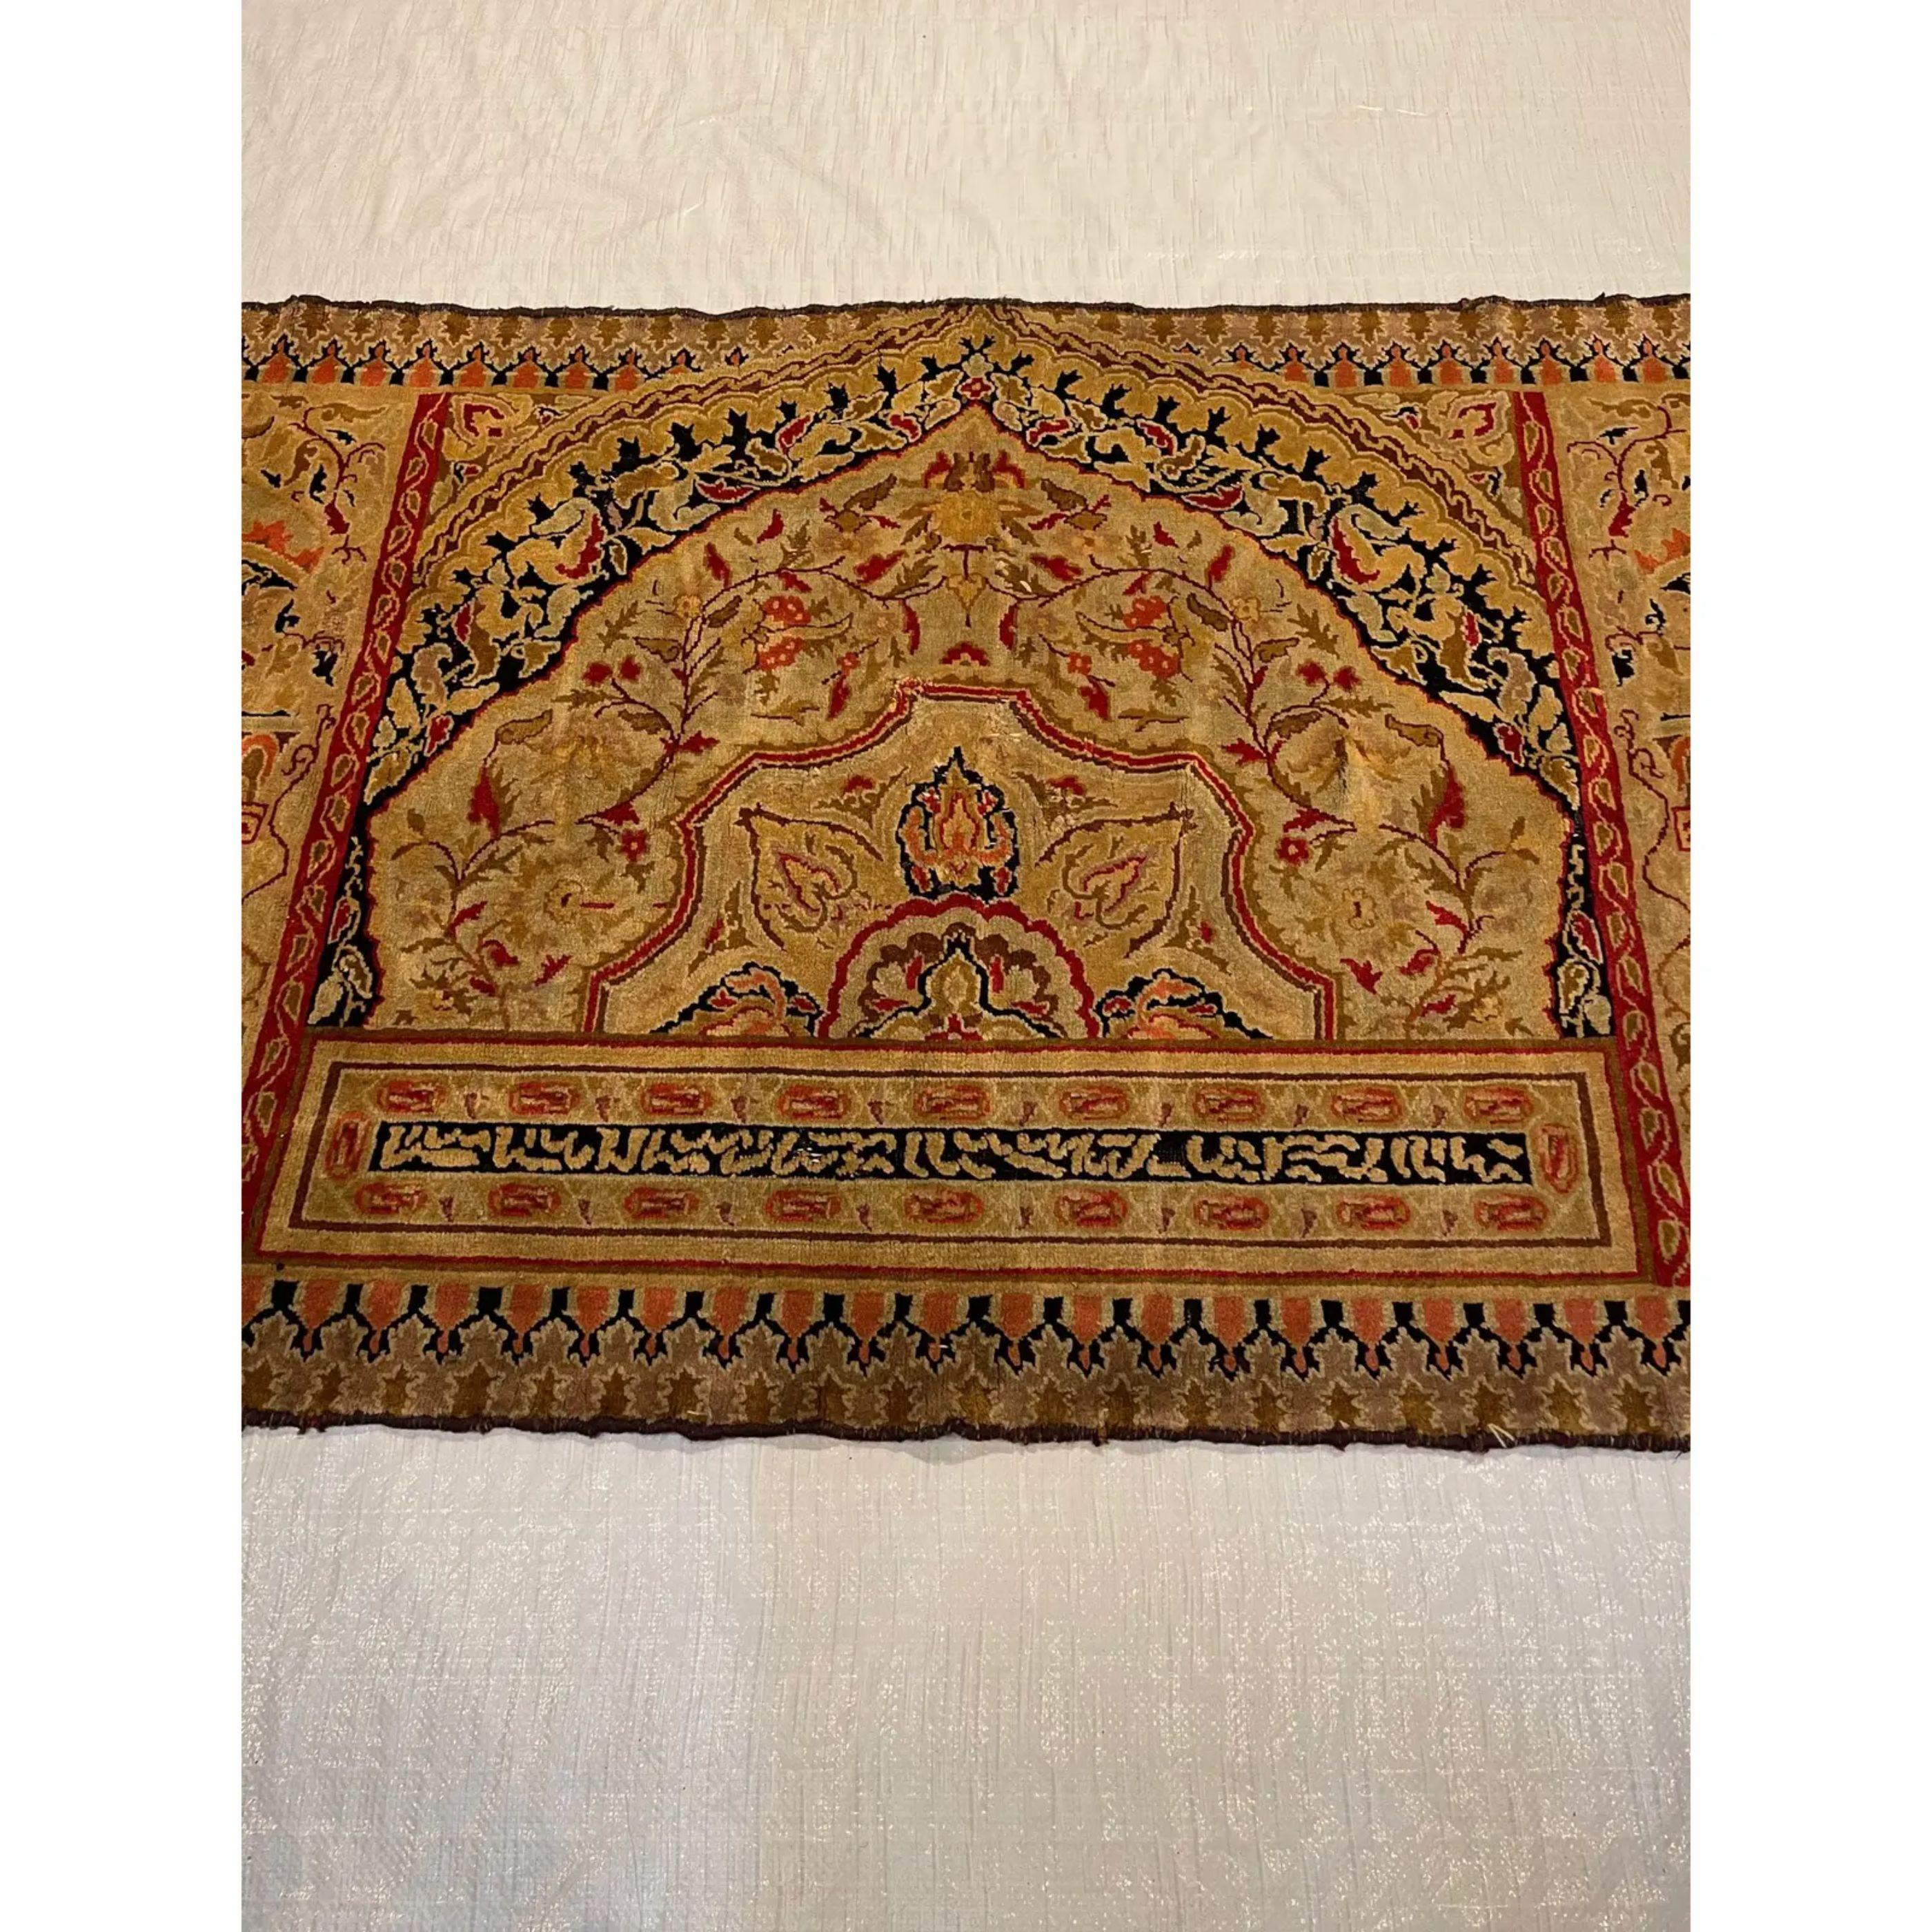 Savonnerie Carpets – During the early seventeenth century, a weaver named Pierre DuPont traveled to the Levant. Upon his return, he claimed to have discovered the technique of creating Turkish rugs. Oriental rugs were extremely expensive during